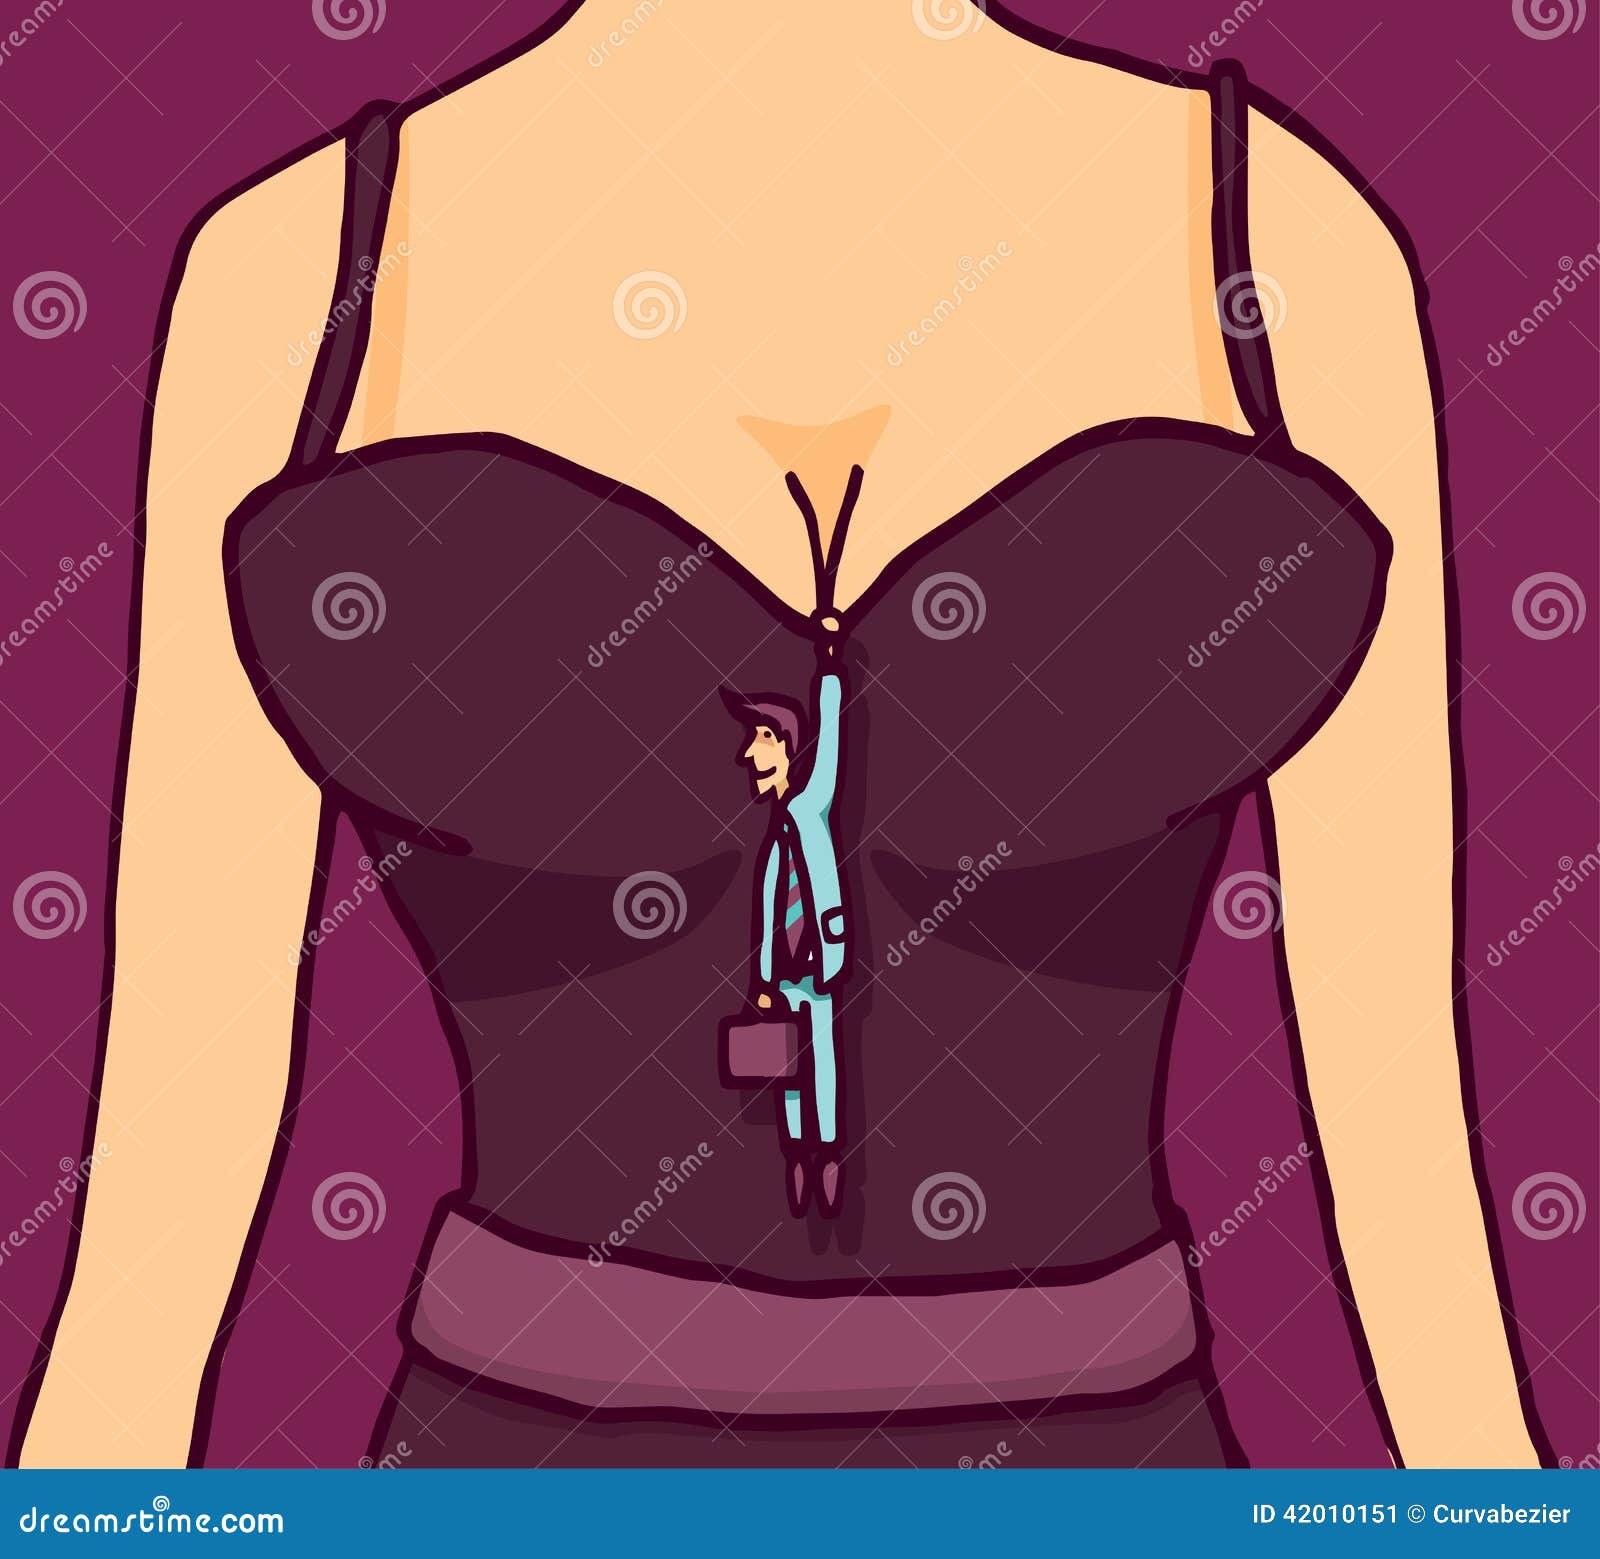 Hanging Cleavage Stock Illustrations – 9 Hanging Cleavage Stock